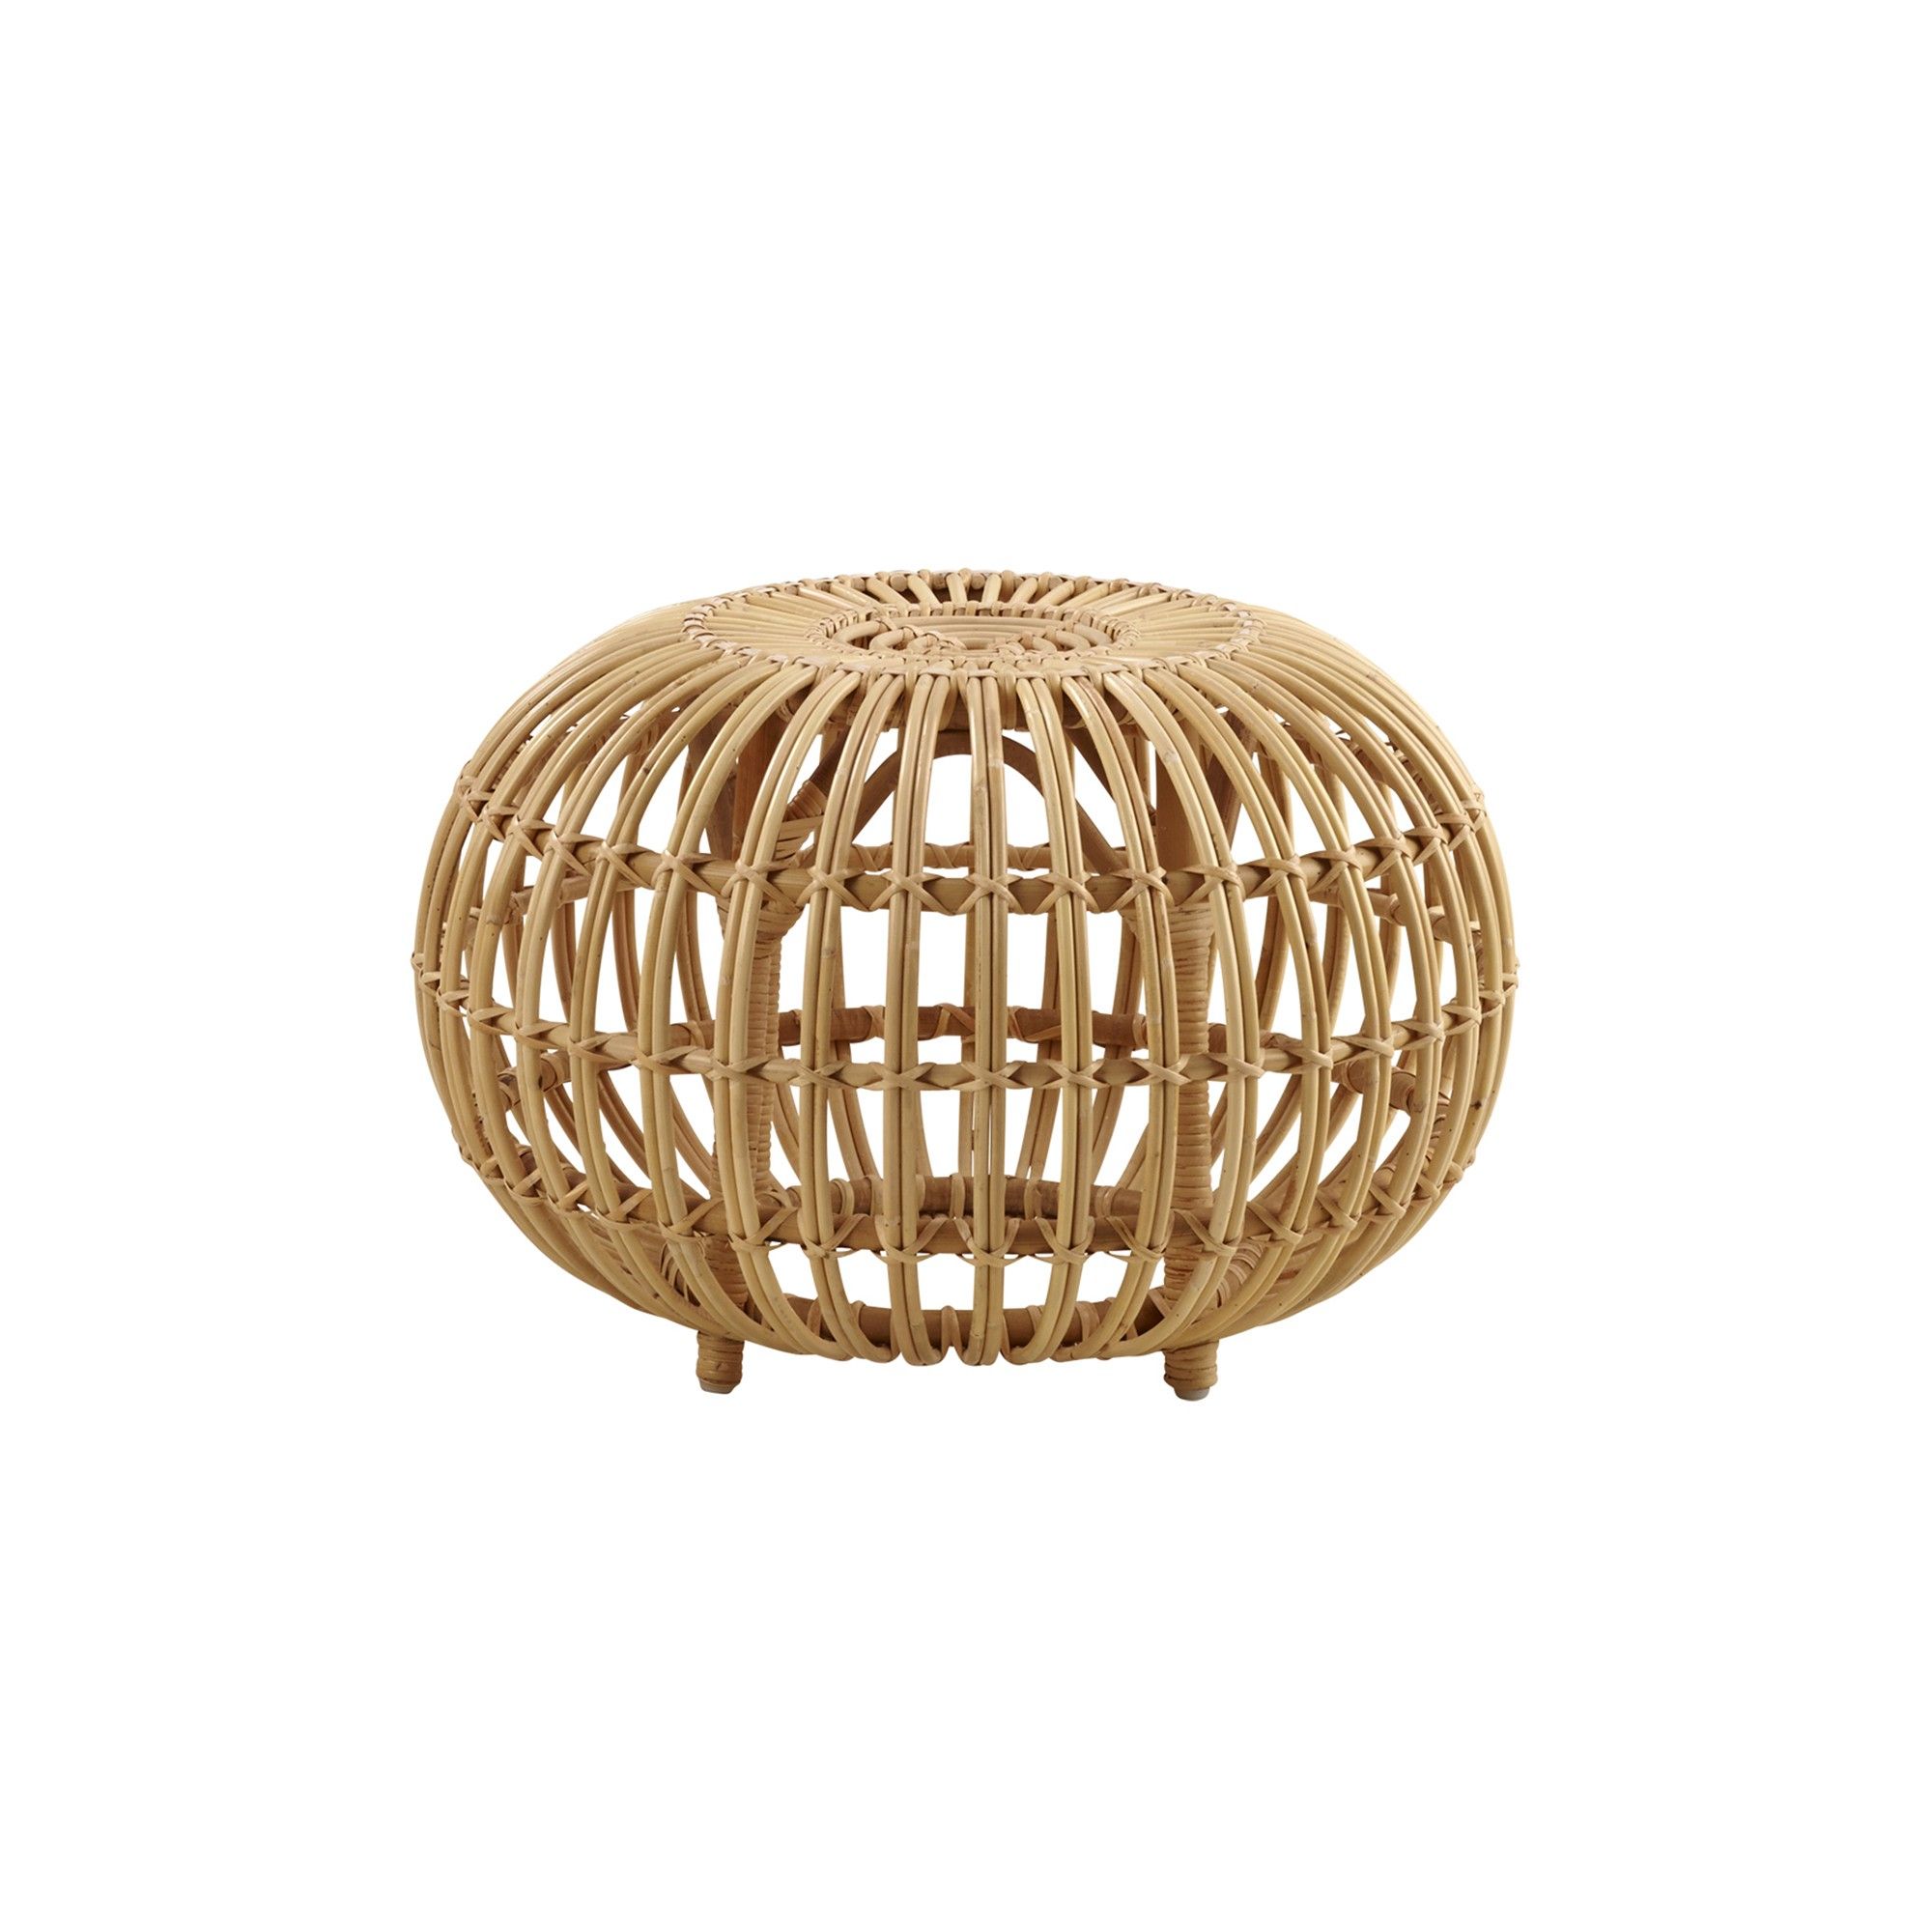 Ottoman Pouf S  Sika Design In Rattan Ottomans (View 5 of 15)